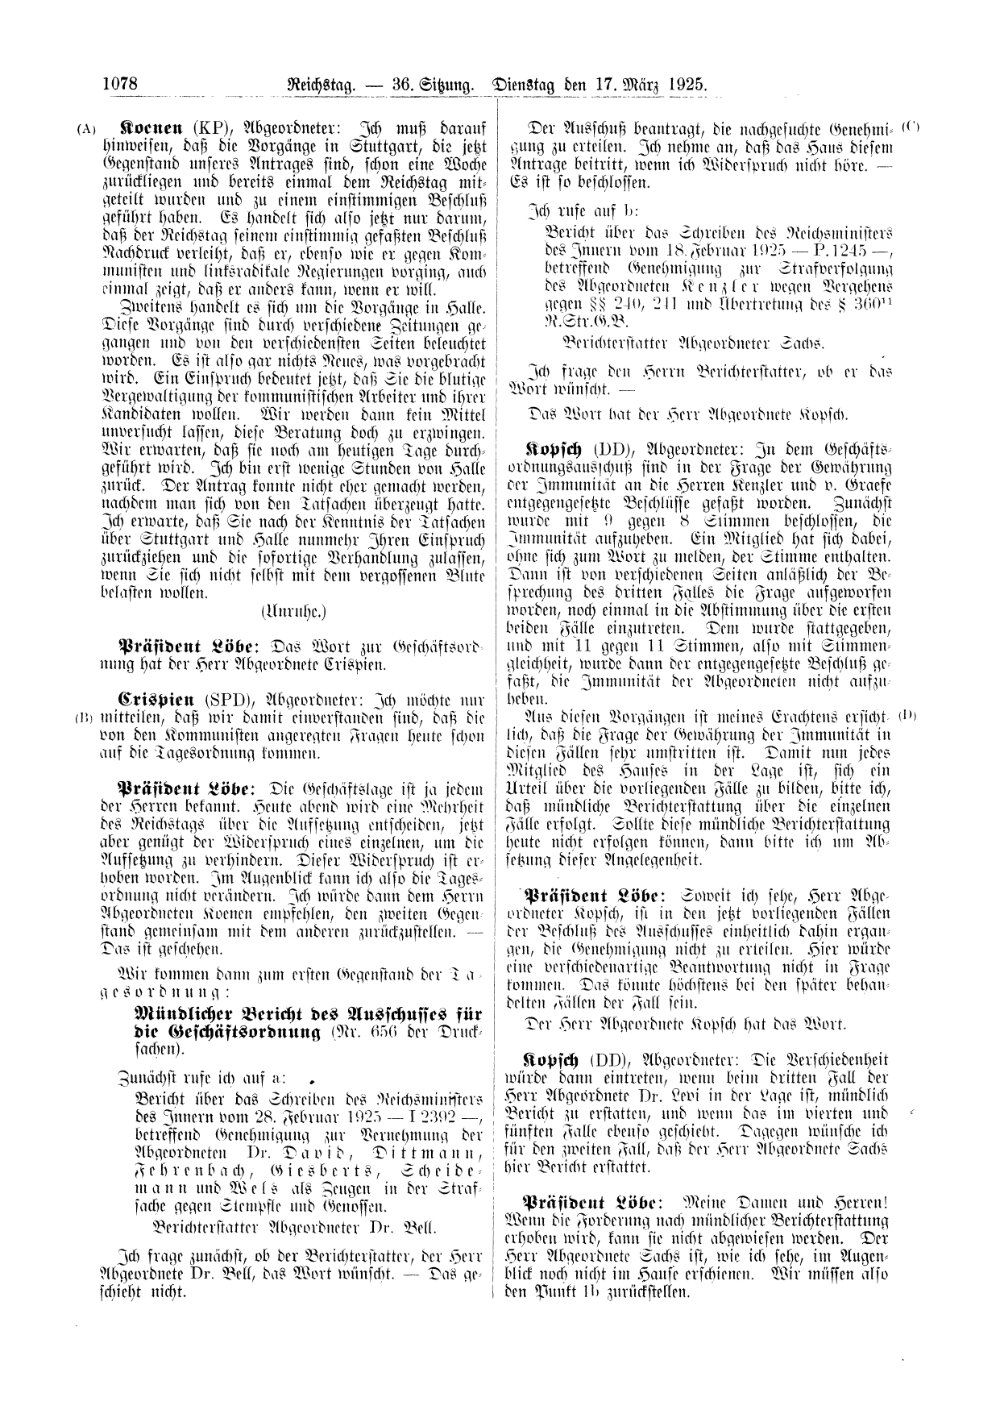 Scan of page 1078